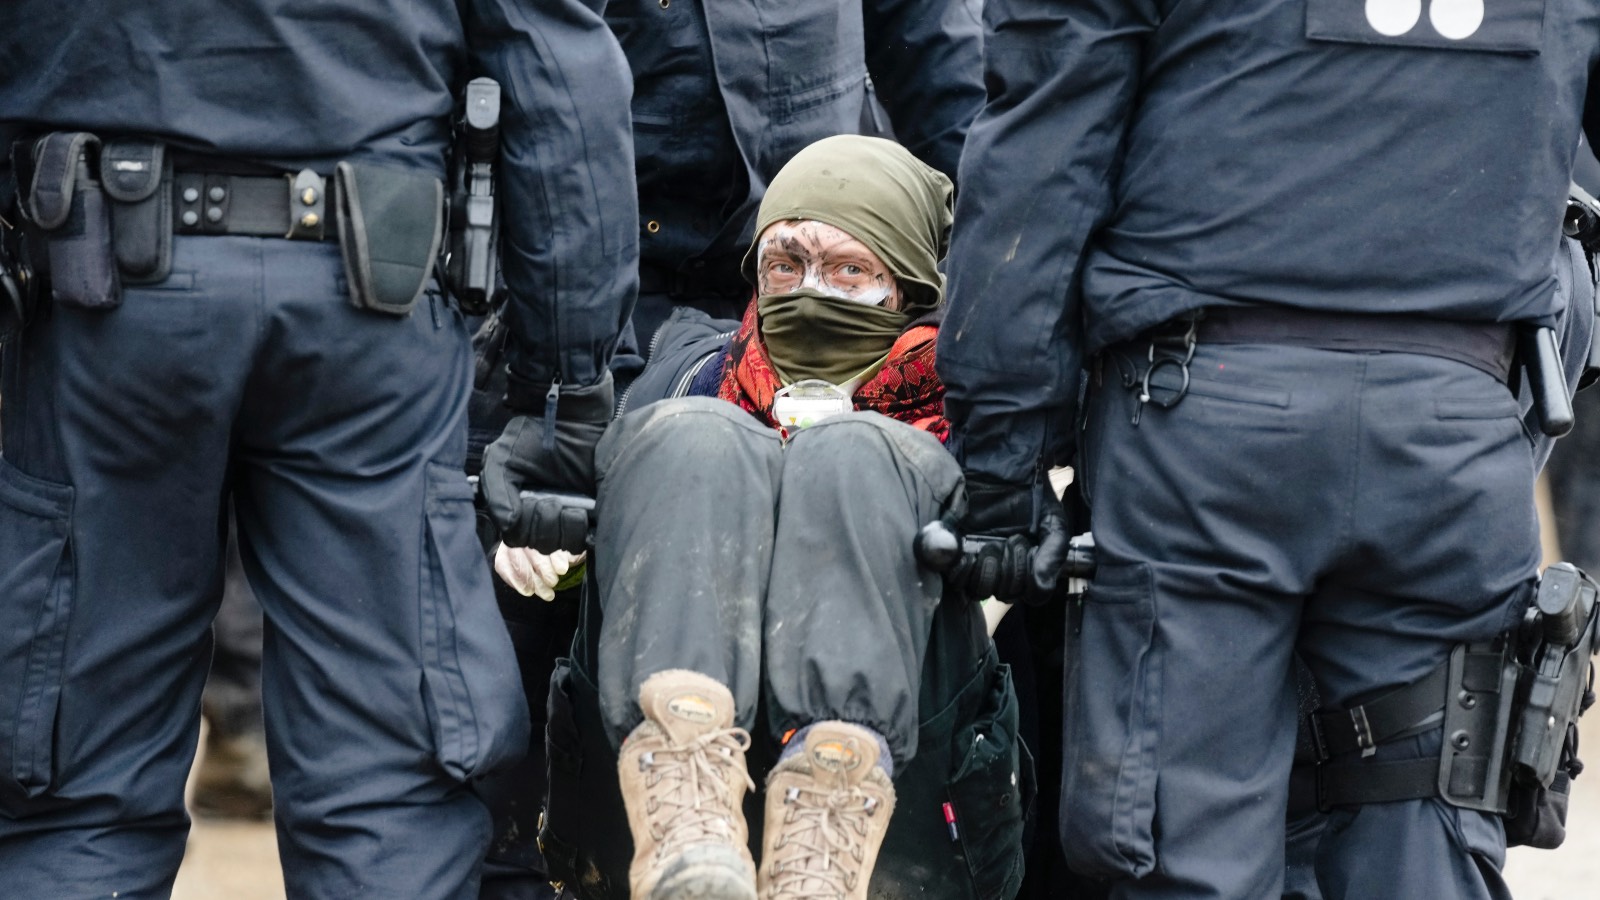 Police in dark suits carry a protestor away from the coal mine. The protestor has dirt on their face and looks slightly off camera.